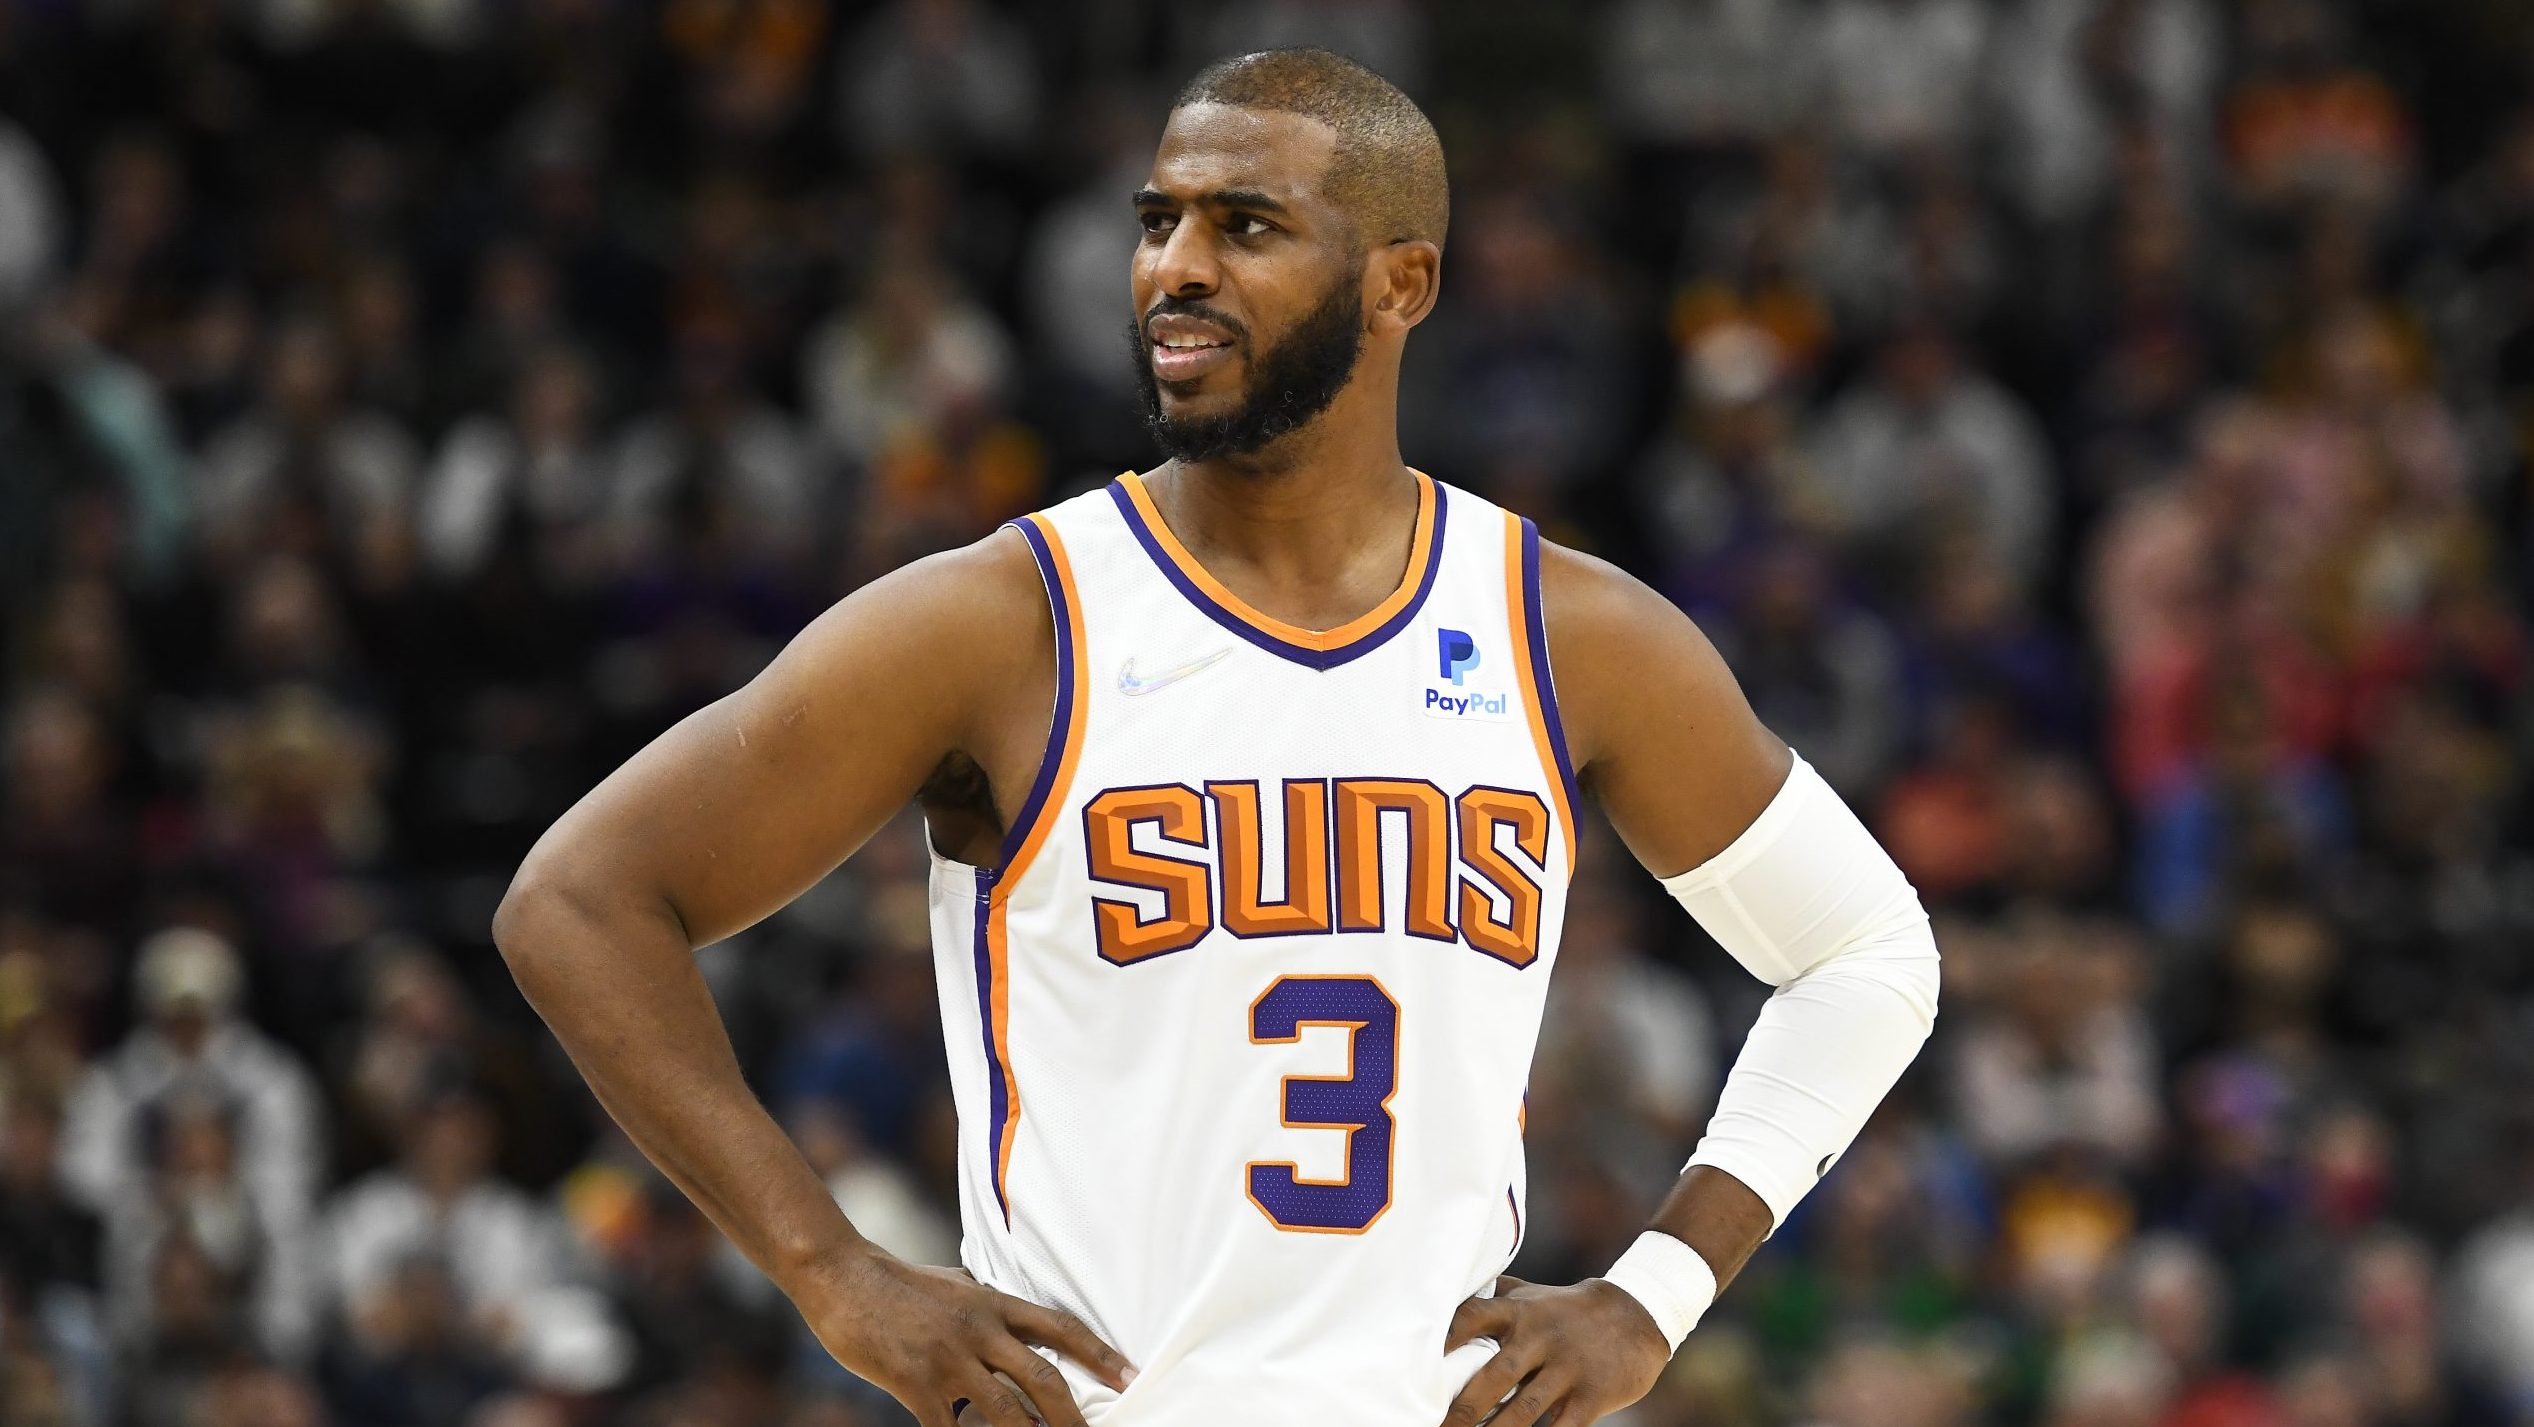 Suns PG Chris Paul named Western Conference Player of the Week